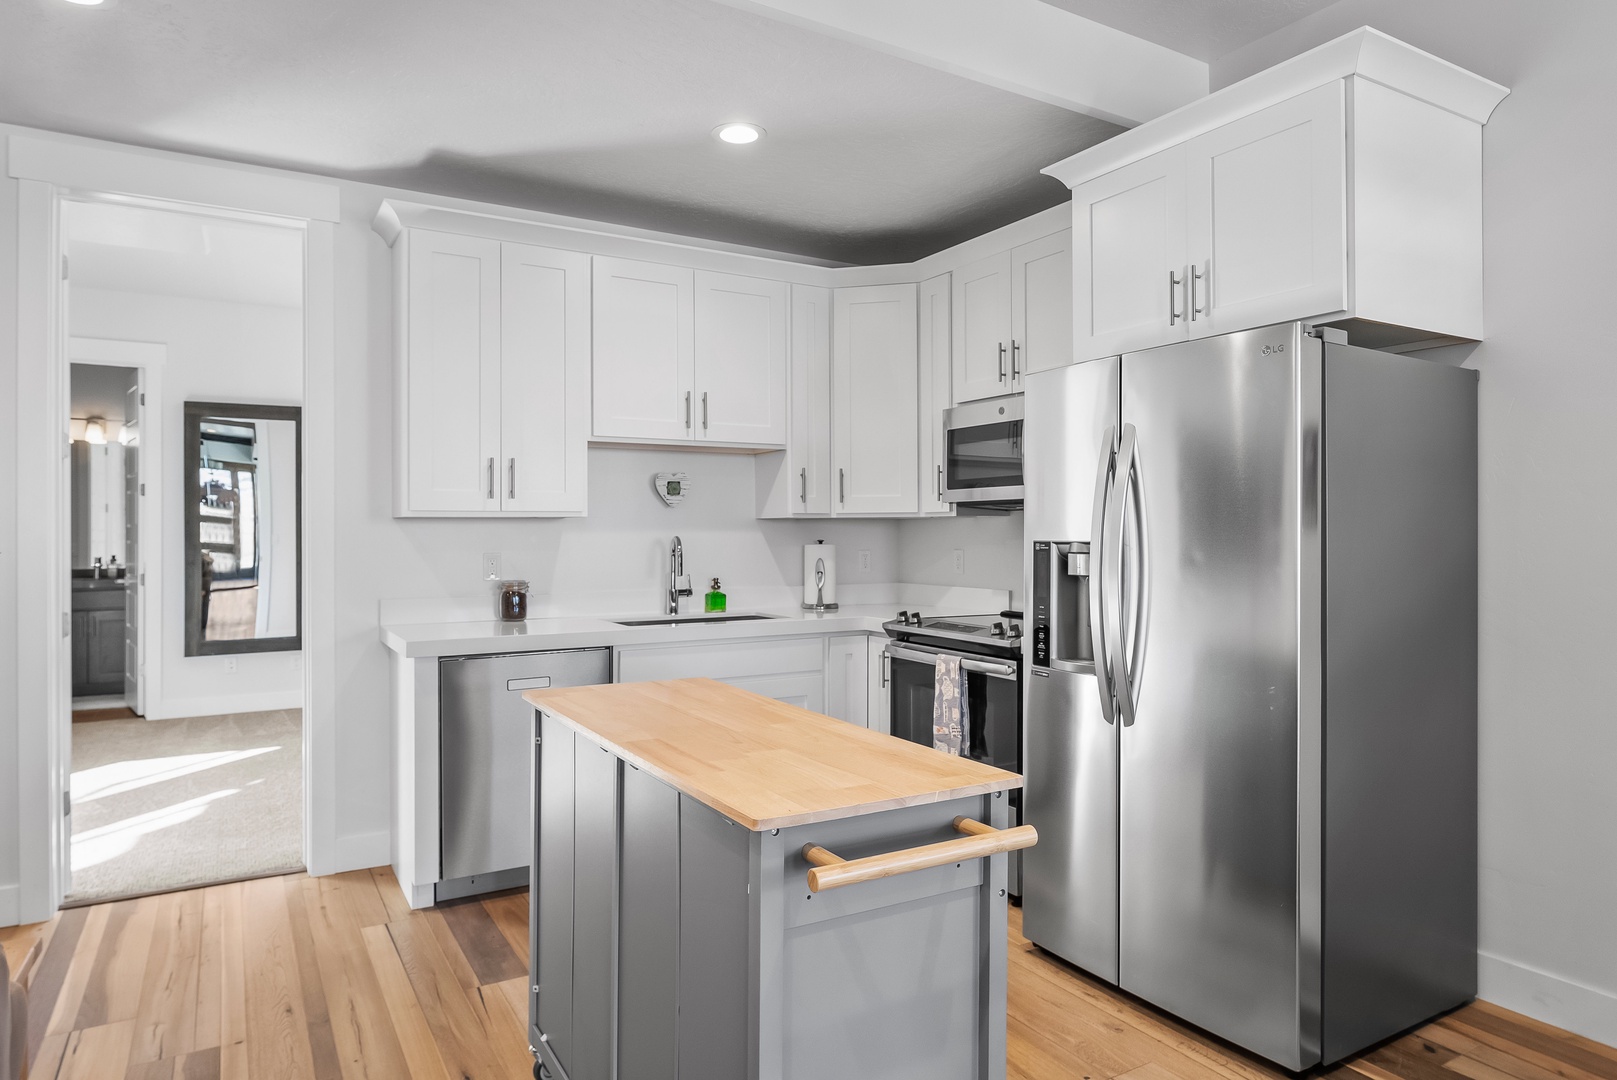 Whip up your favorite meals in the fully equipped kitchen with stainless steel appliances